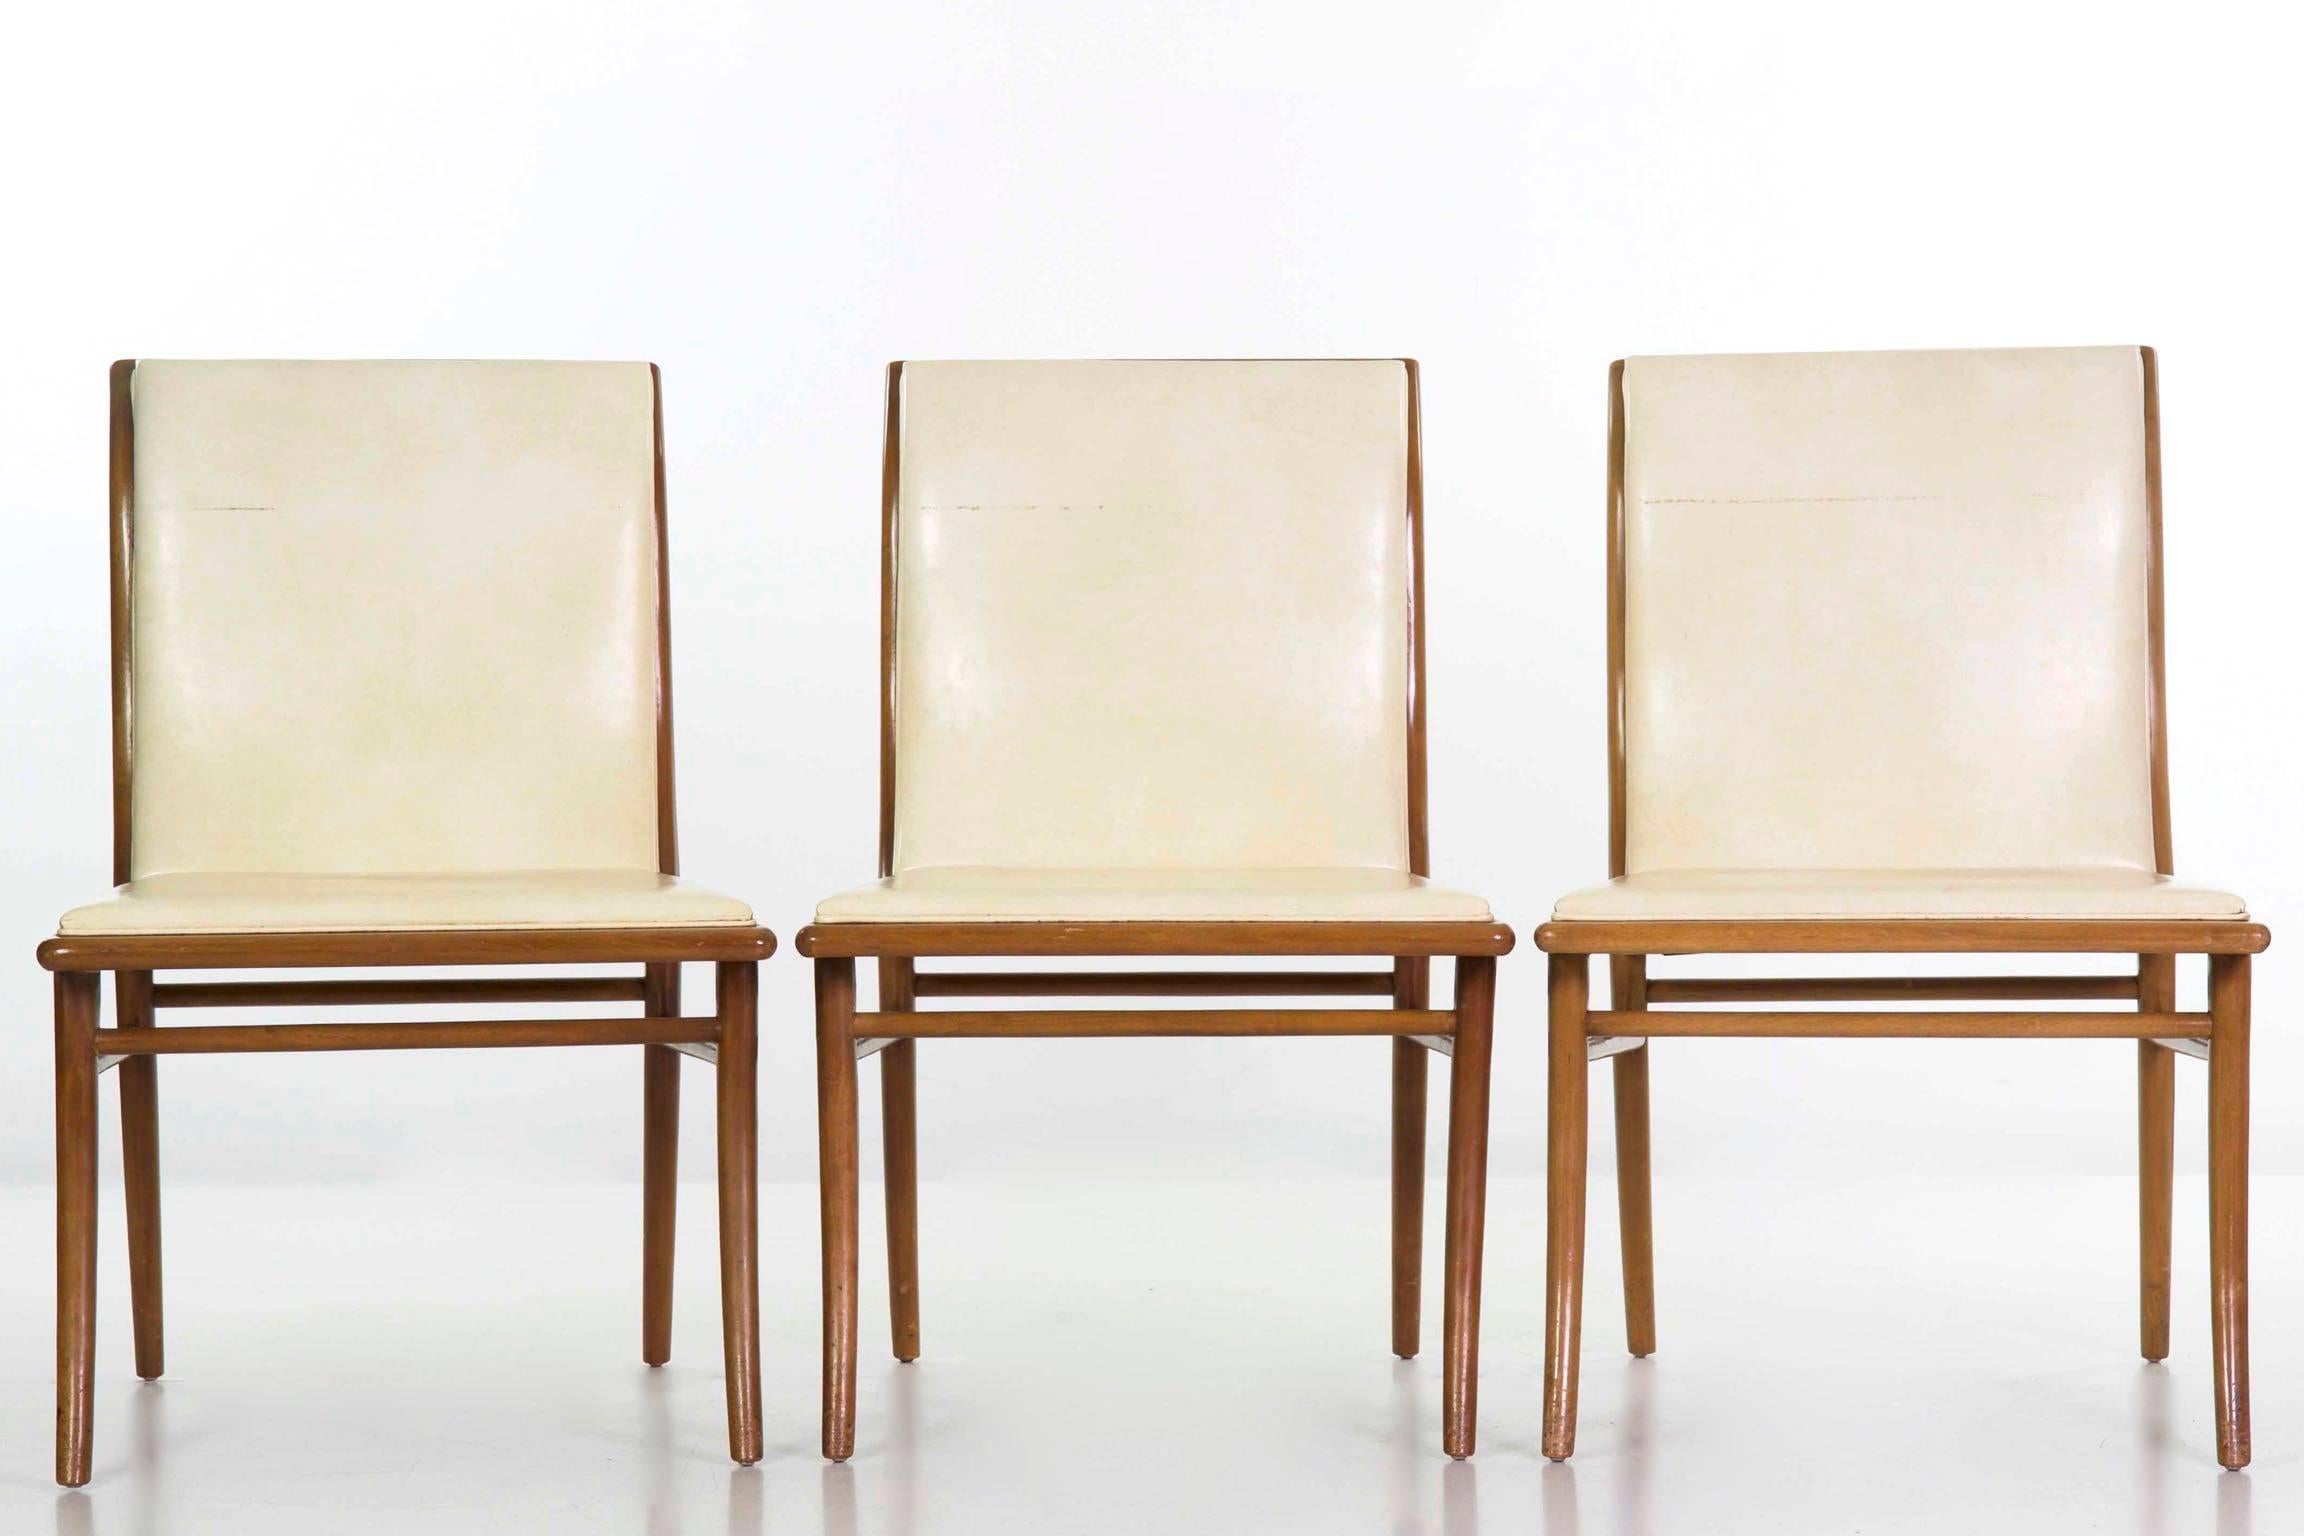 Mid-20th Century Mid-Century Modern Dining Table and Six Chairs by T.H. Robsjohn-Gibbings